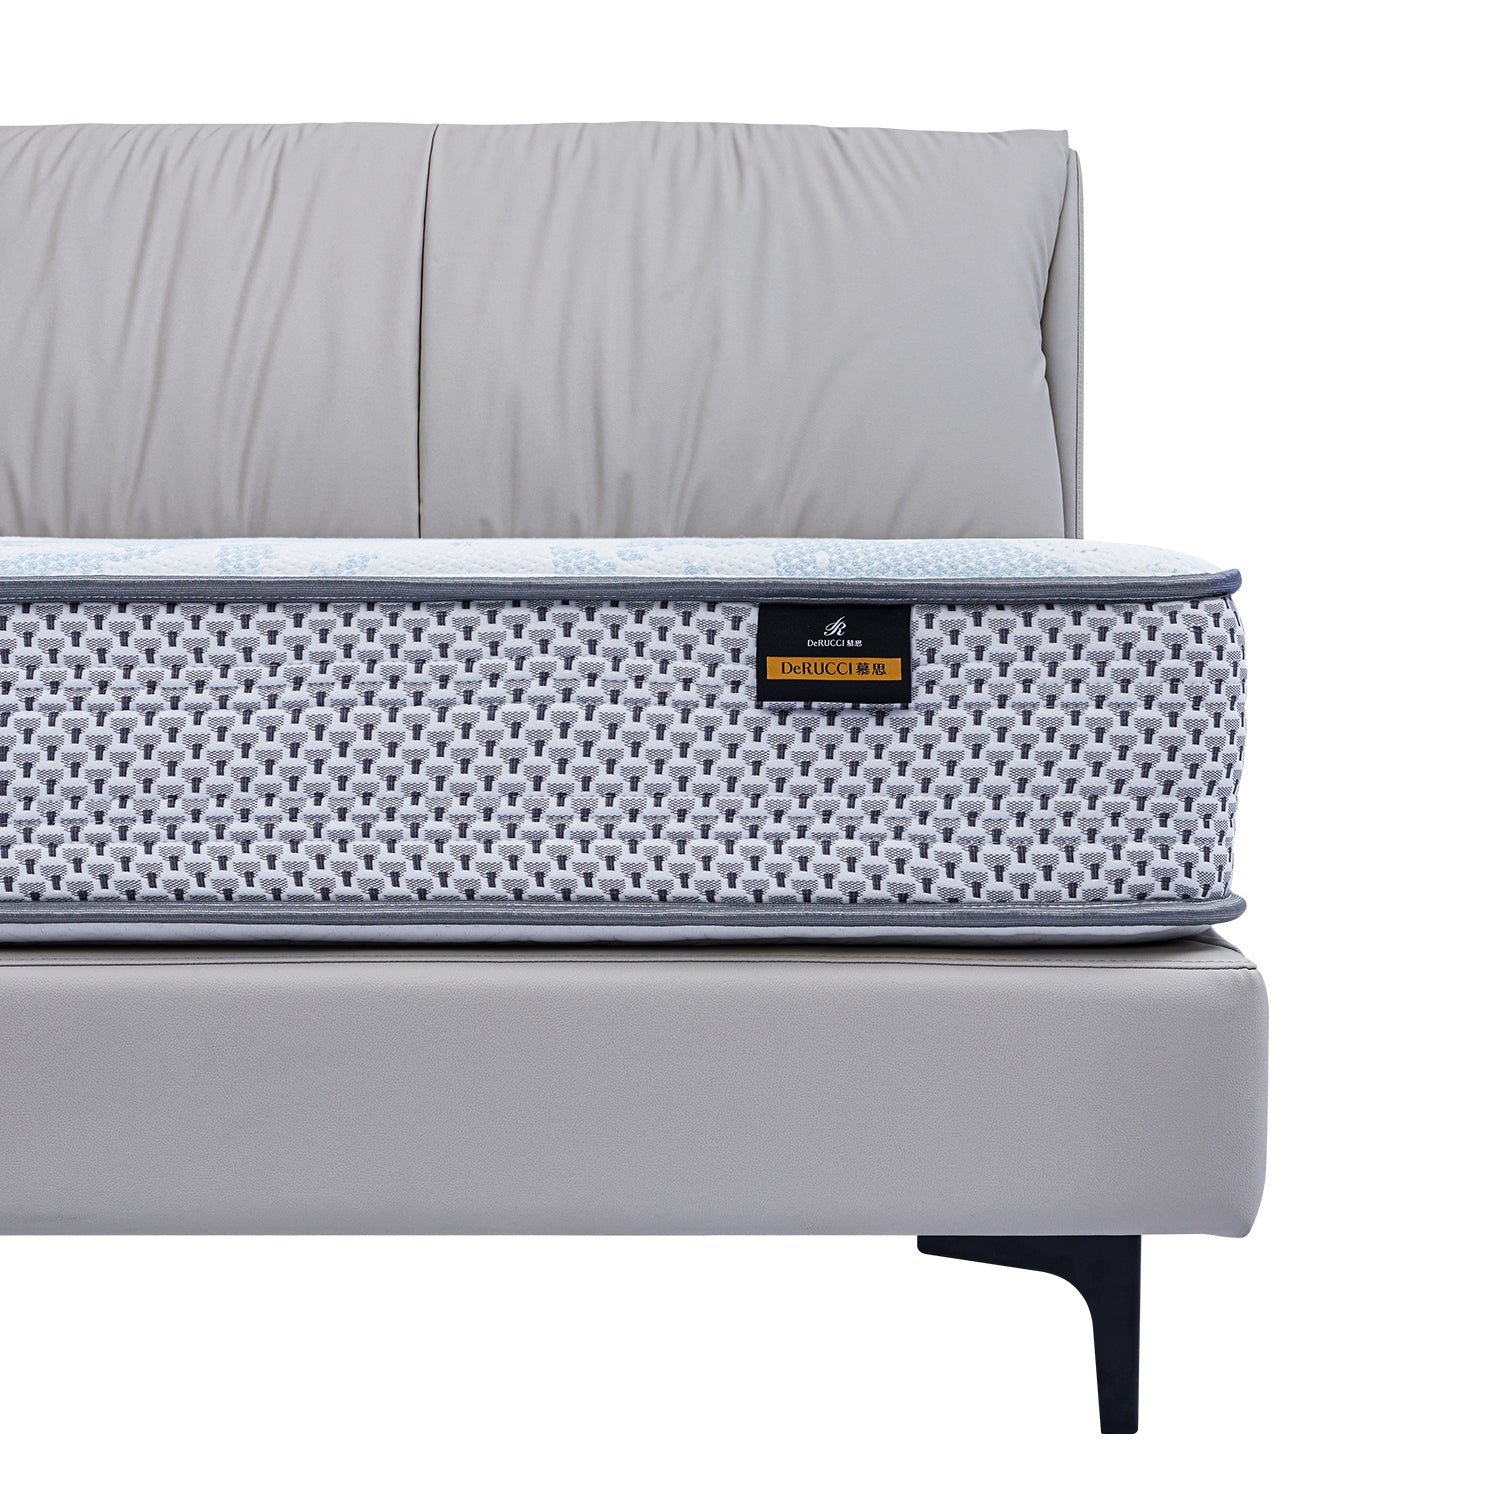 DeRUCCI light grey upholstered bed frame BOC1 - 012 with patterned mattress and sleek sturdy legs, close-up view